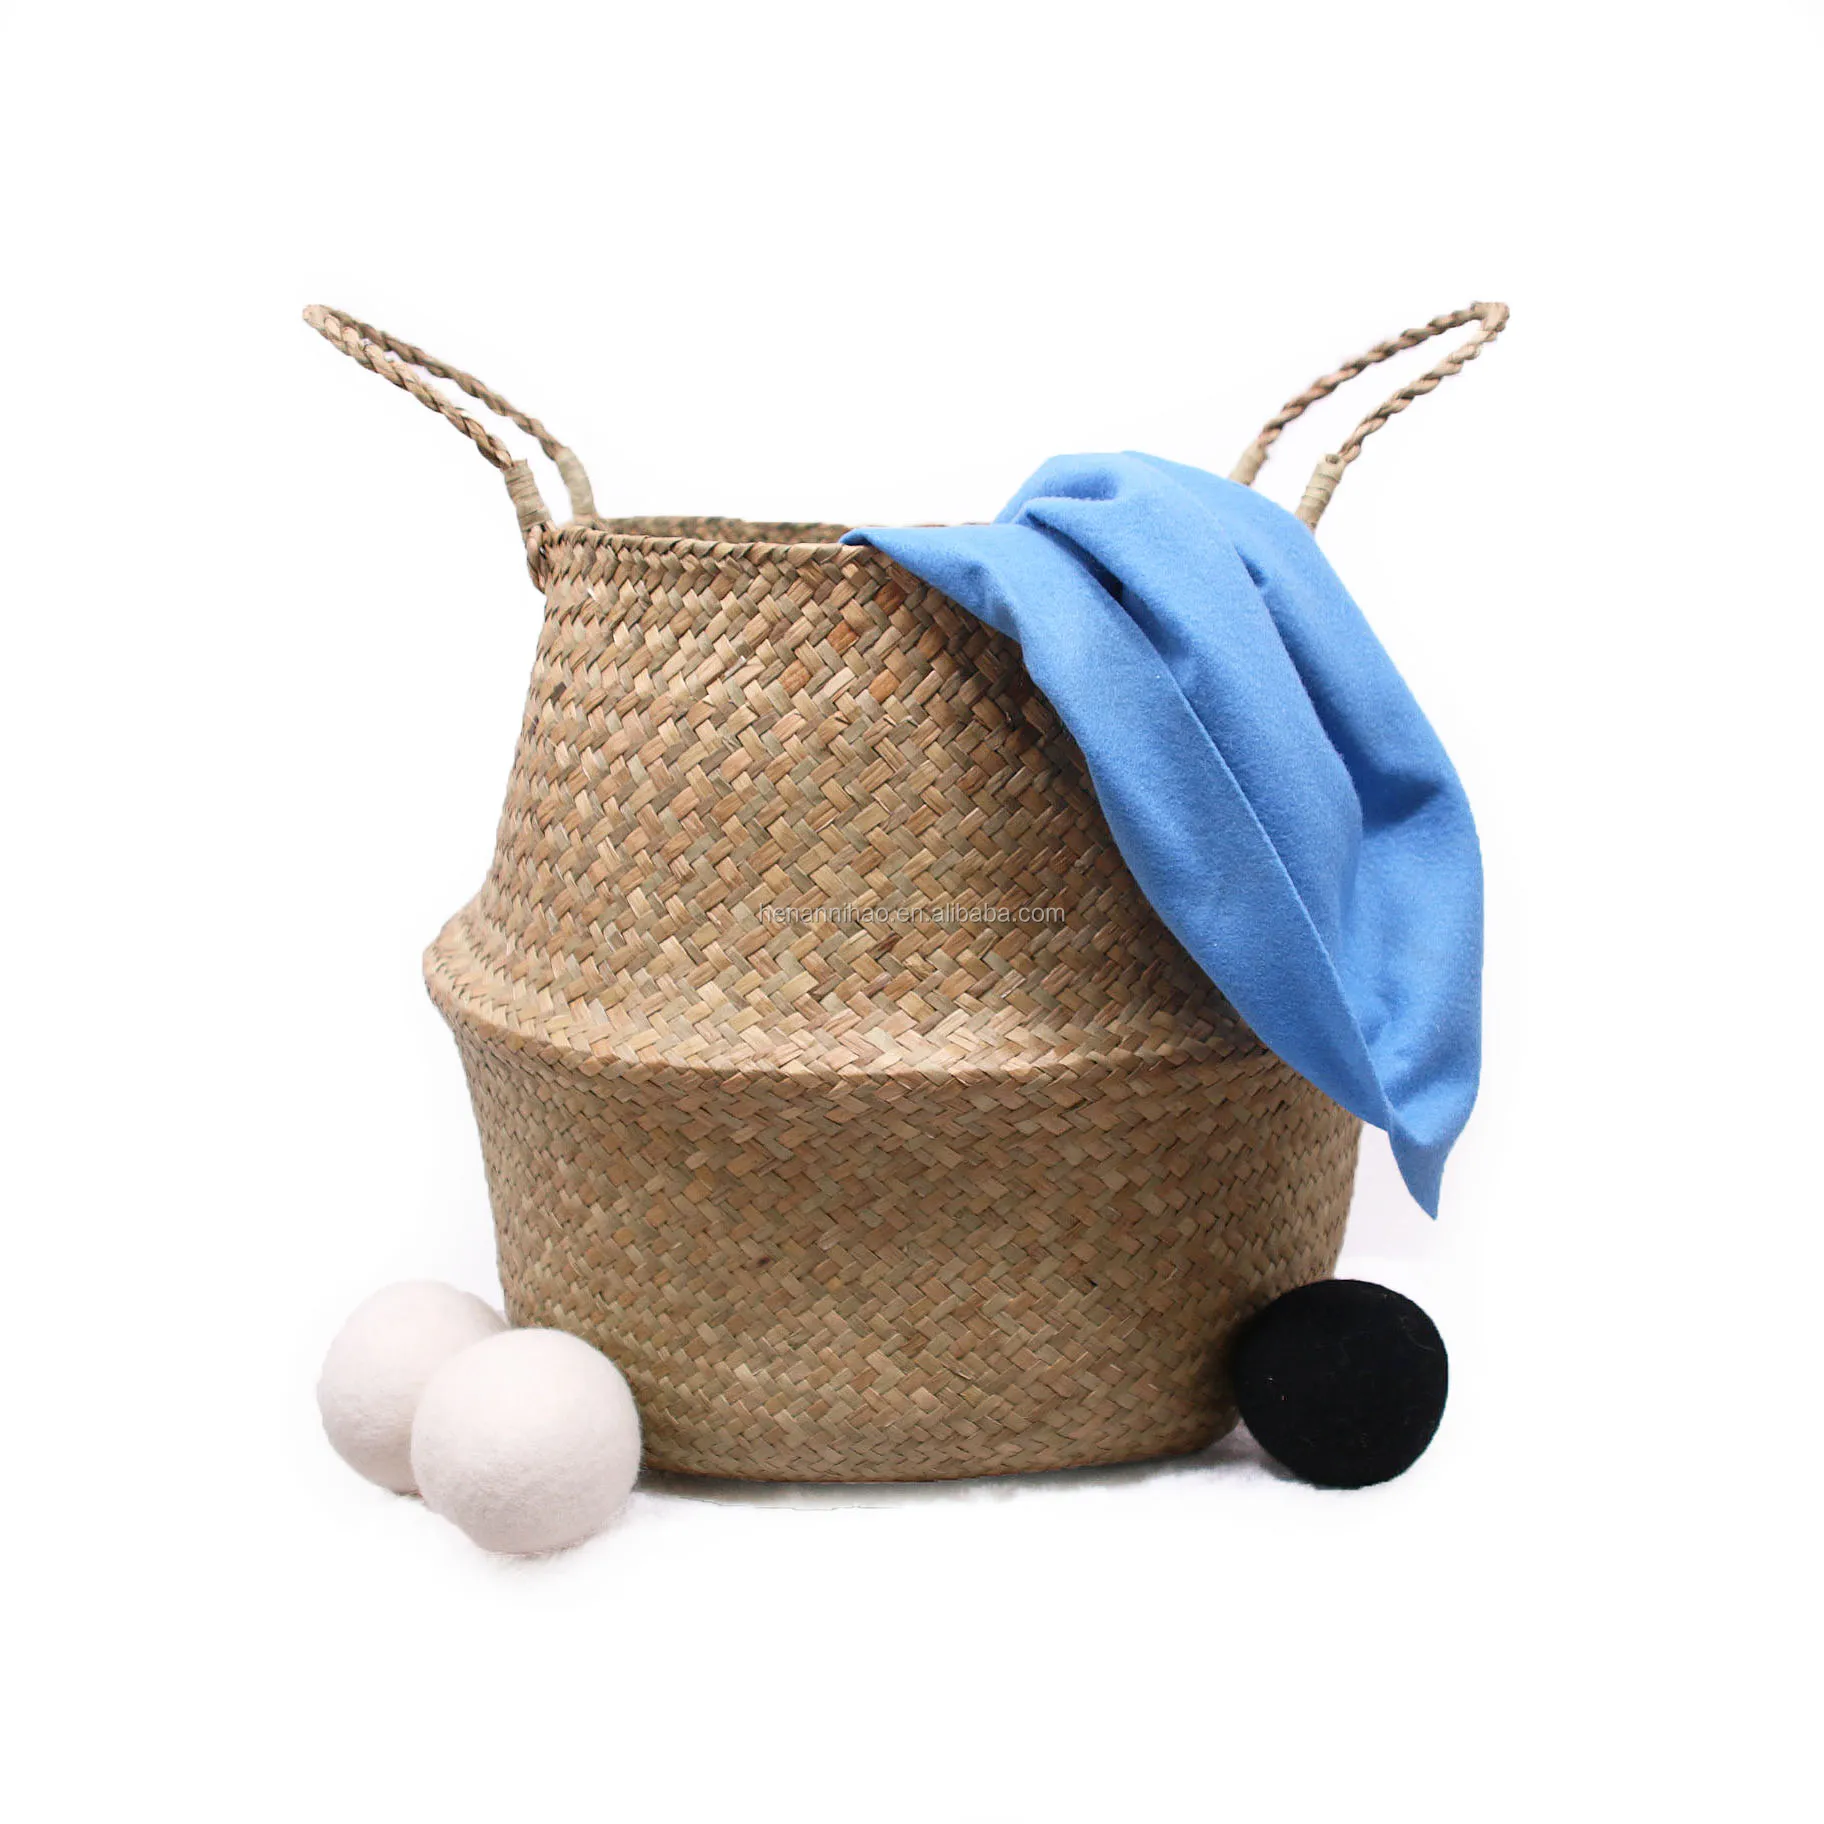 

Woven Seagrass Belly Basket Foldable Storage Basket with Handles for Laundry, Picnic, Pot Cover, Natural, Eco-Frienly